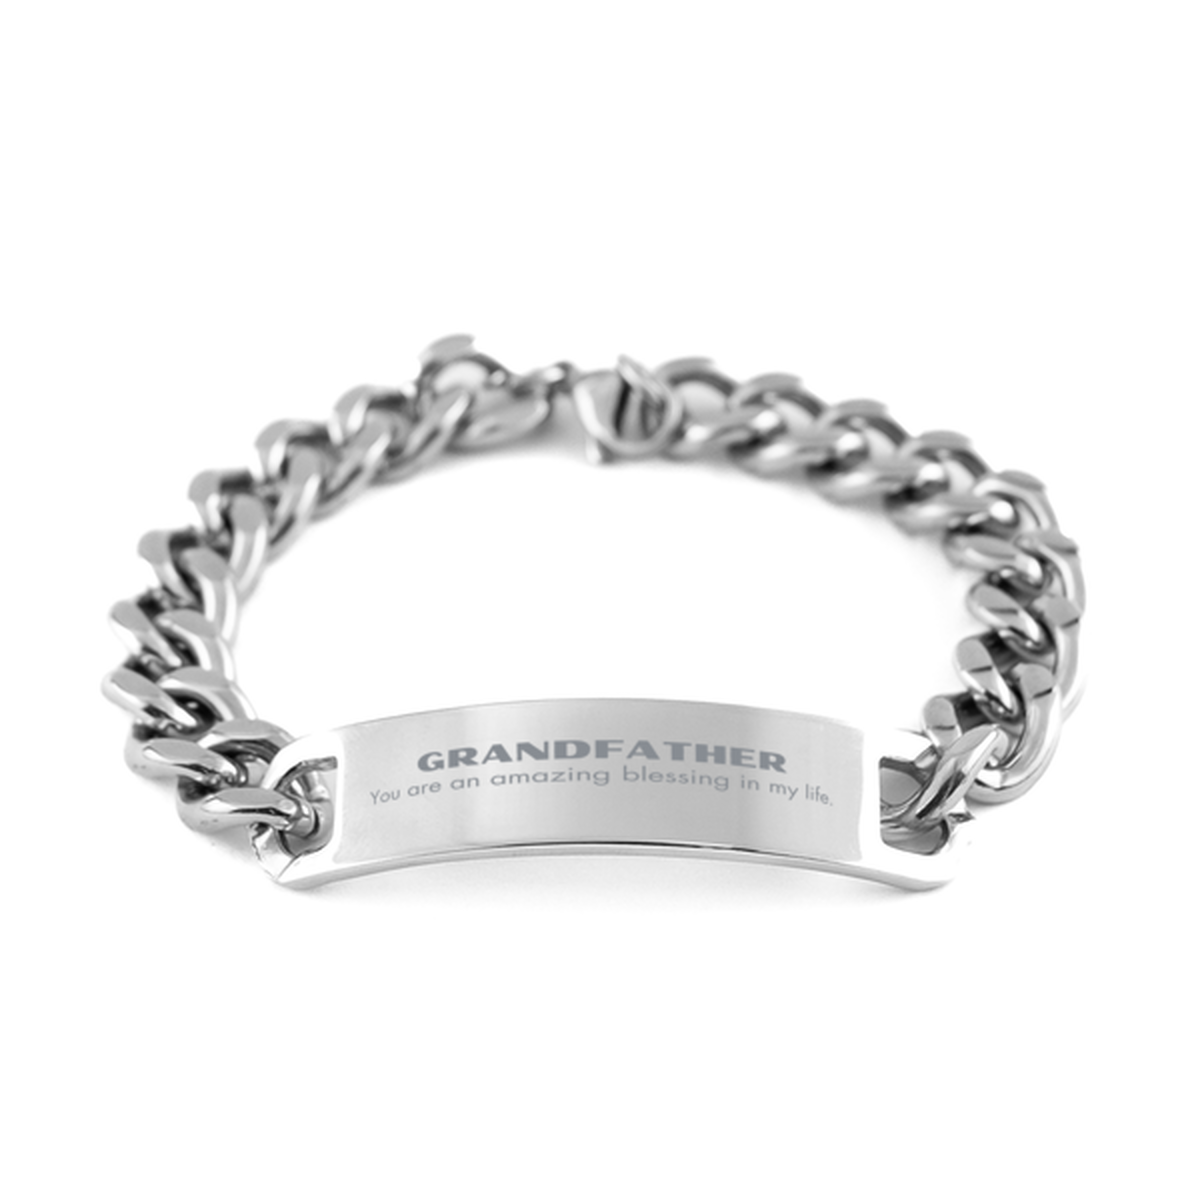 Grandfather Cuban Chain Stainless Steel Bracelet, You are an amazing blessing in my life, Thank You Gifts For Grandfather, Inspirational Birthday Christmas Unique Gifts For Grandfather